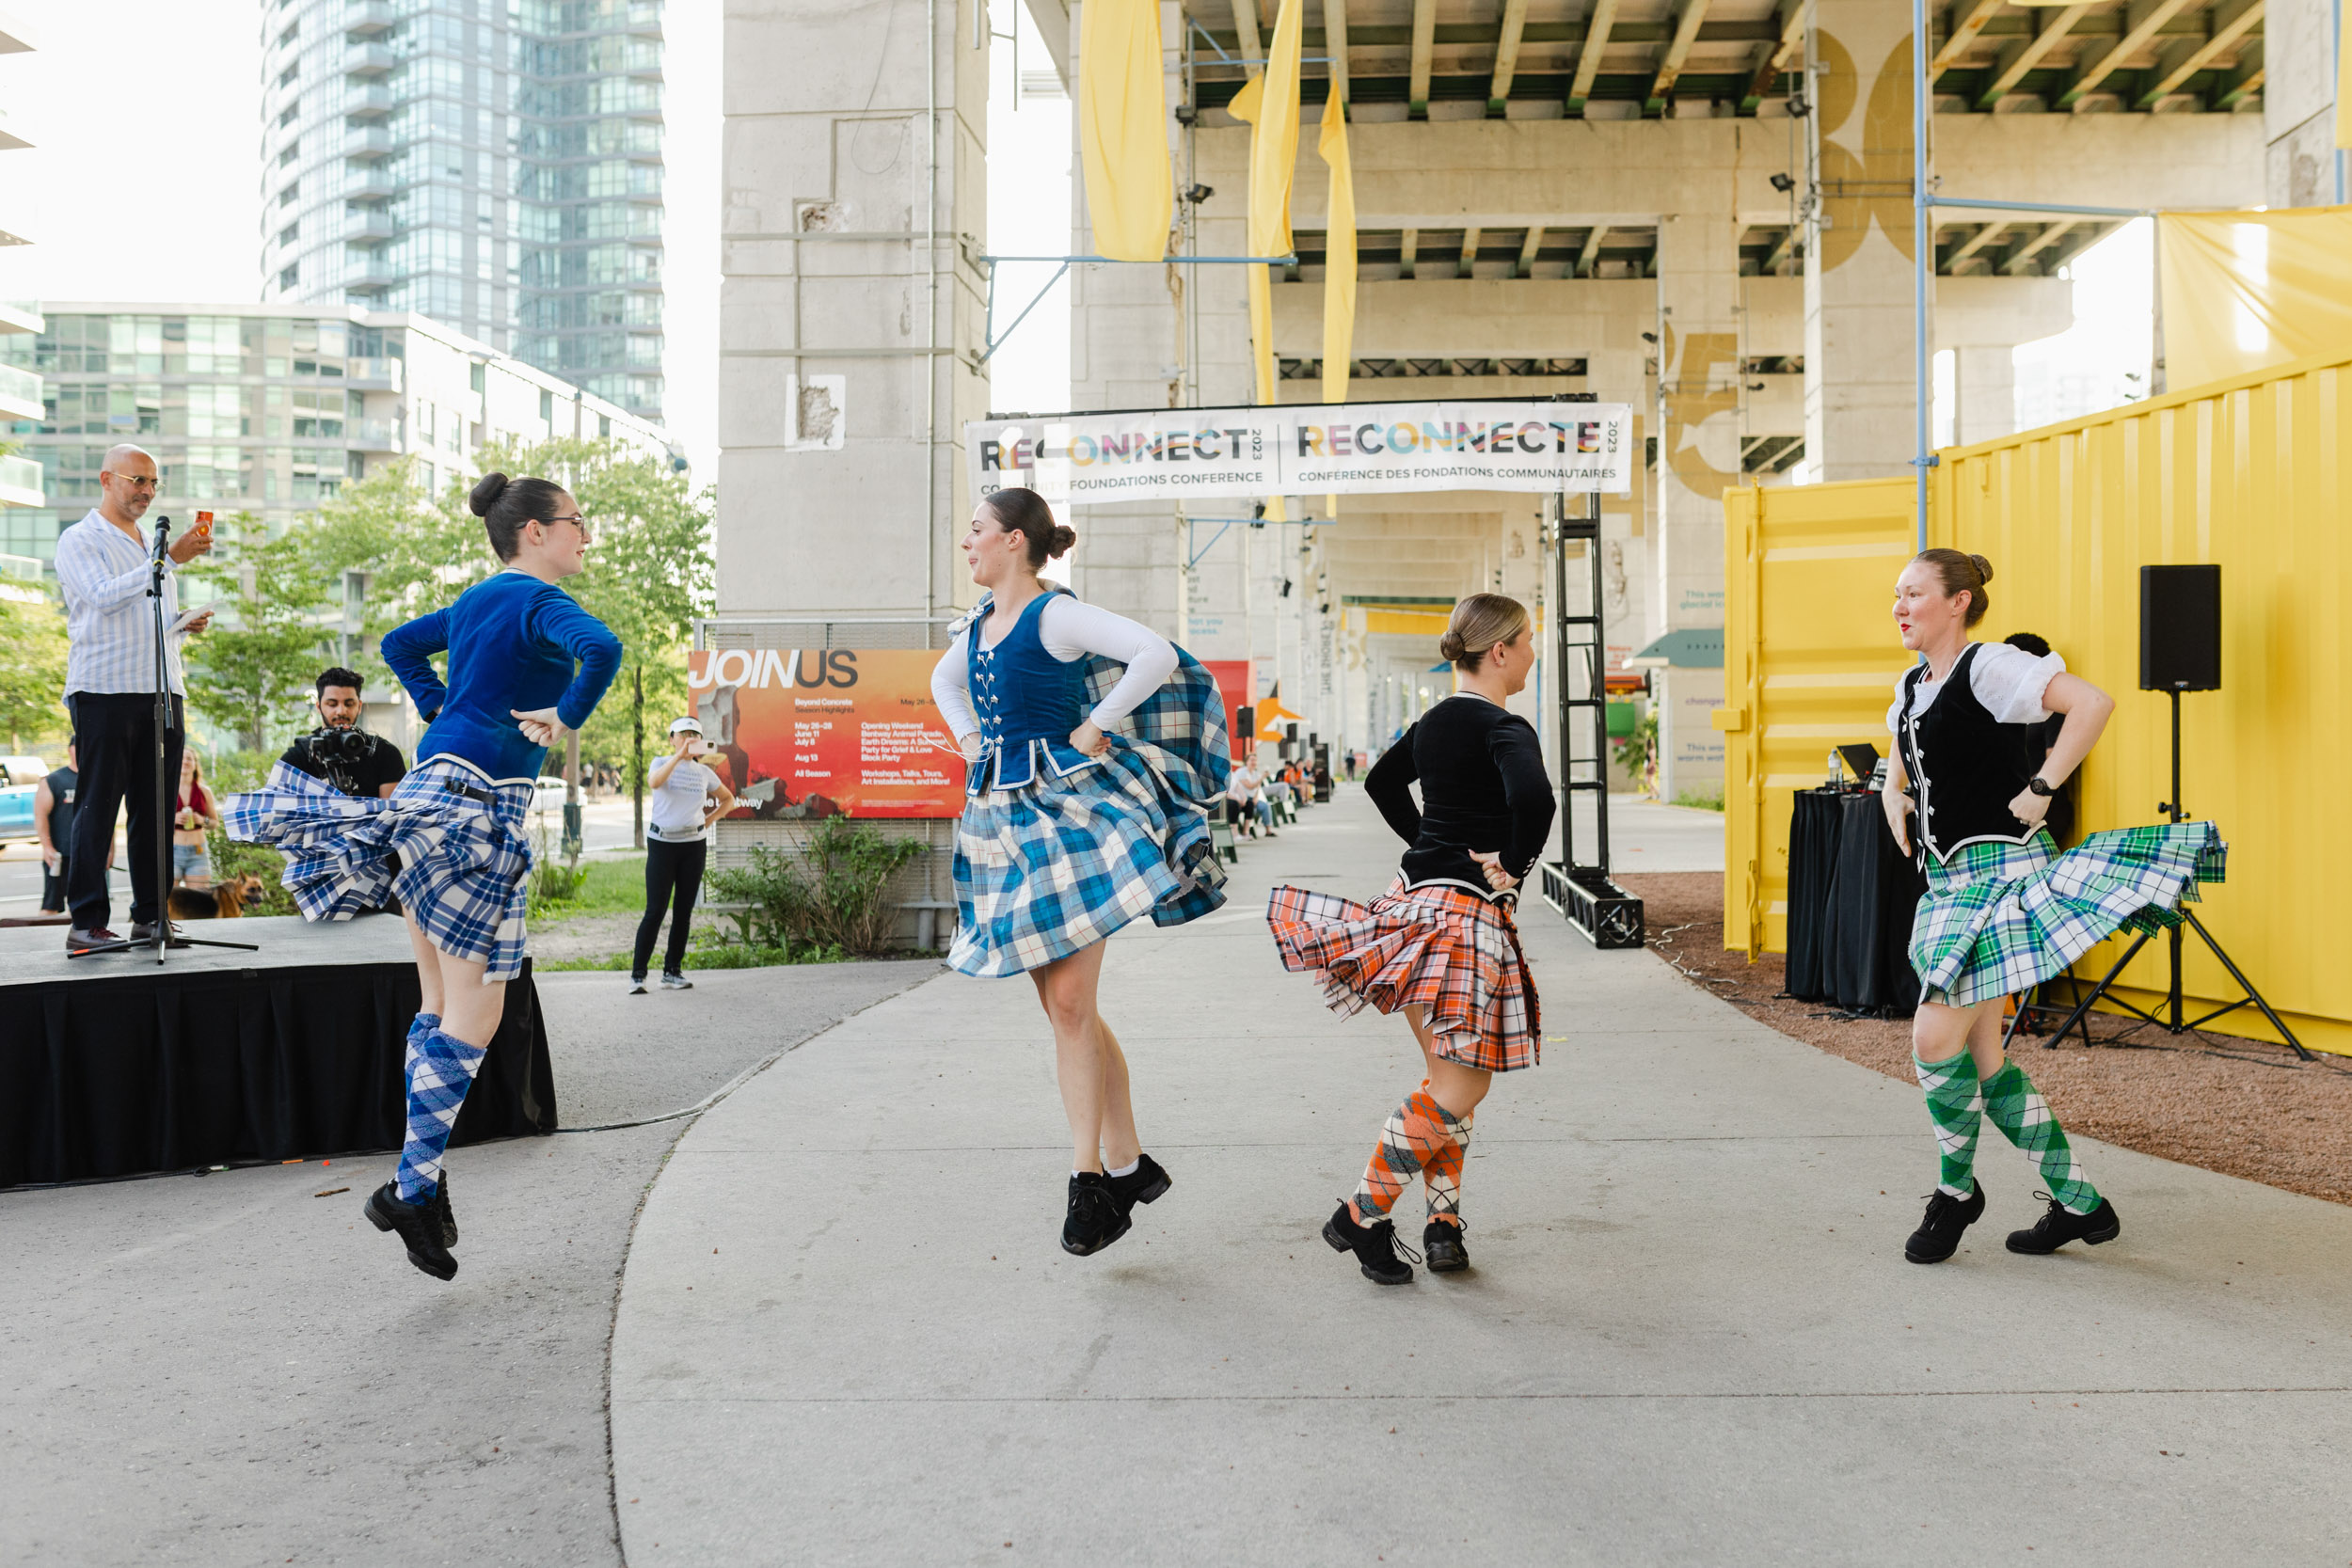 Photograph of Scottish dancers in kilts performing during a conference.